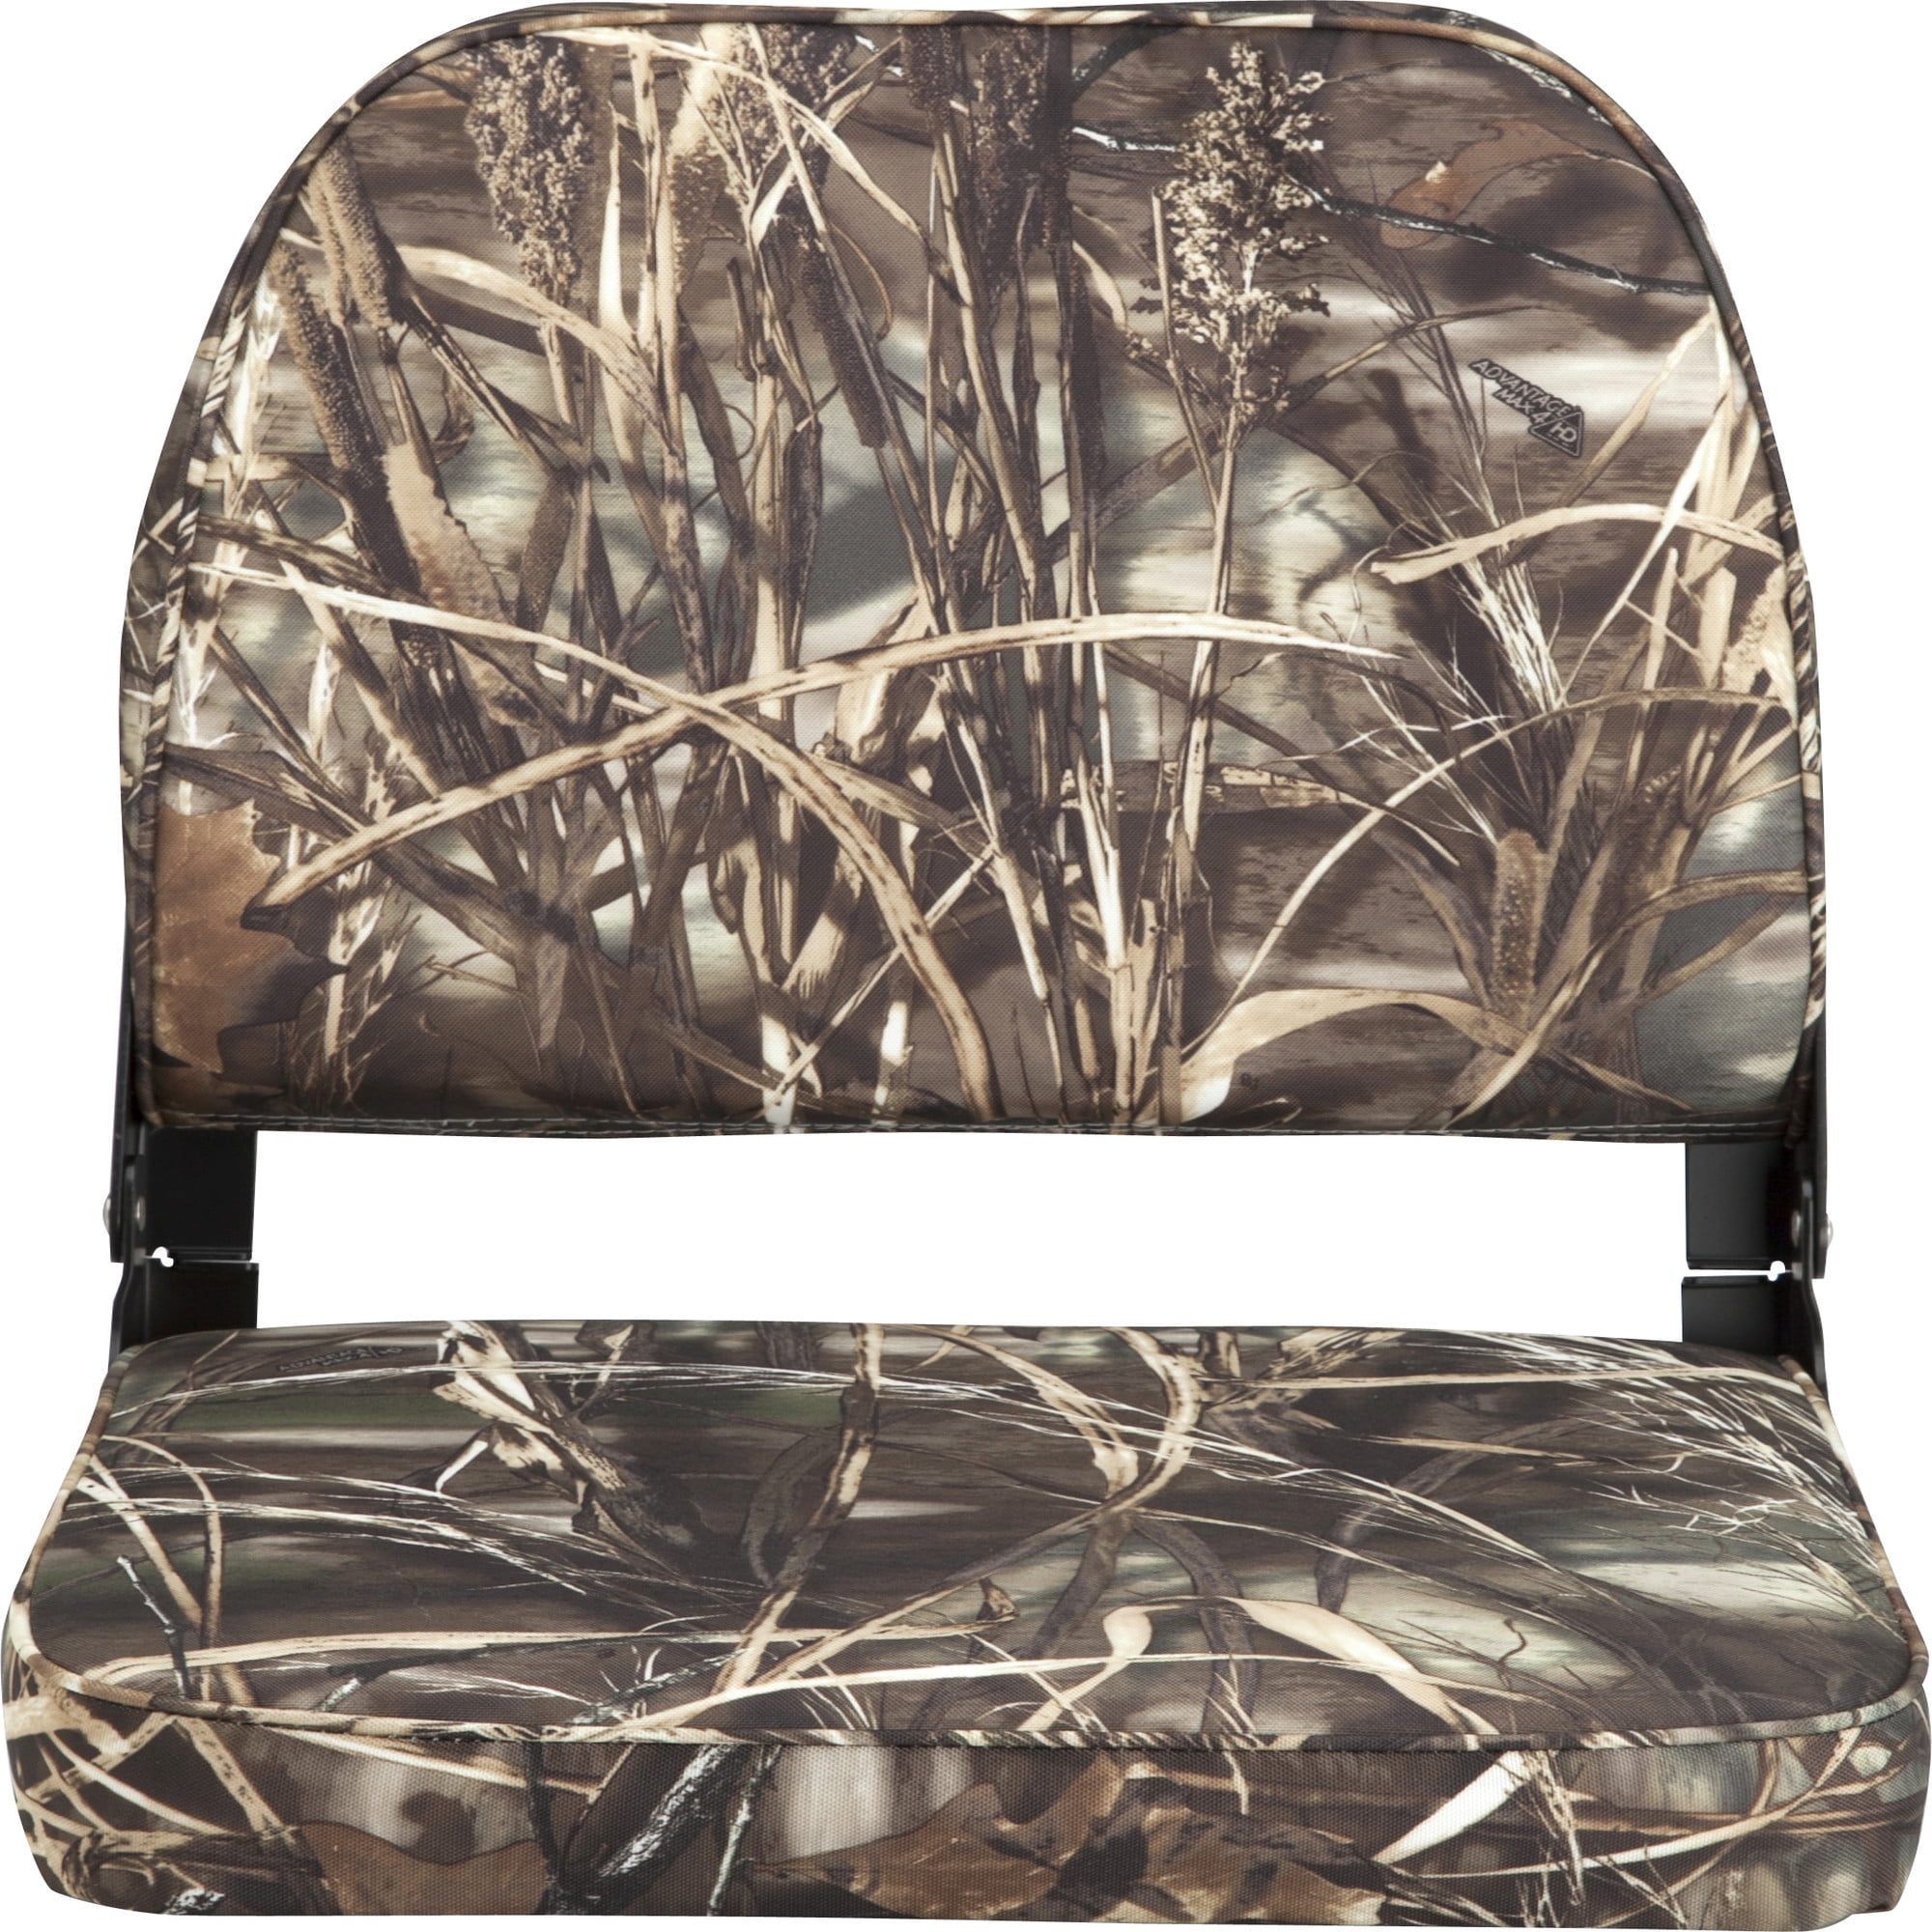 WISE BOAT SEAT ADVANTAGE MAX 4 CAMO WITH BROWN SHELL 8WD139-732G 